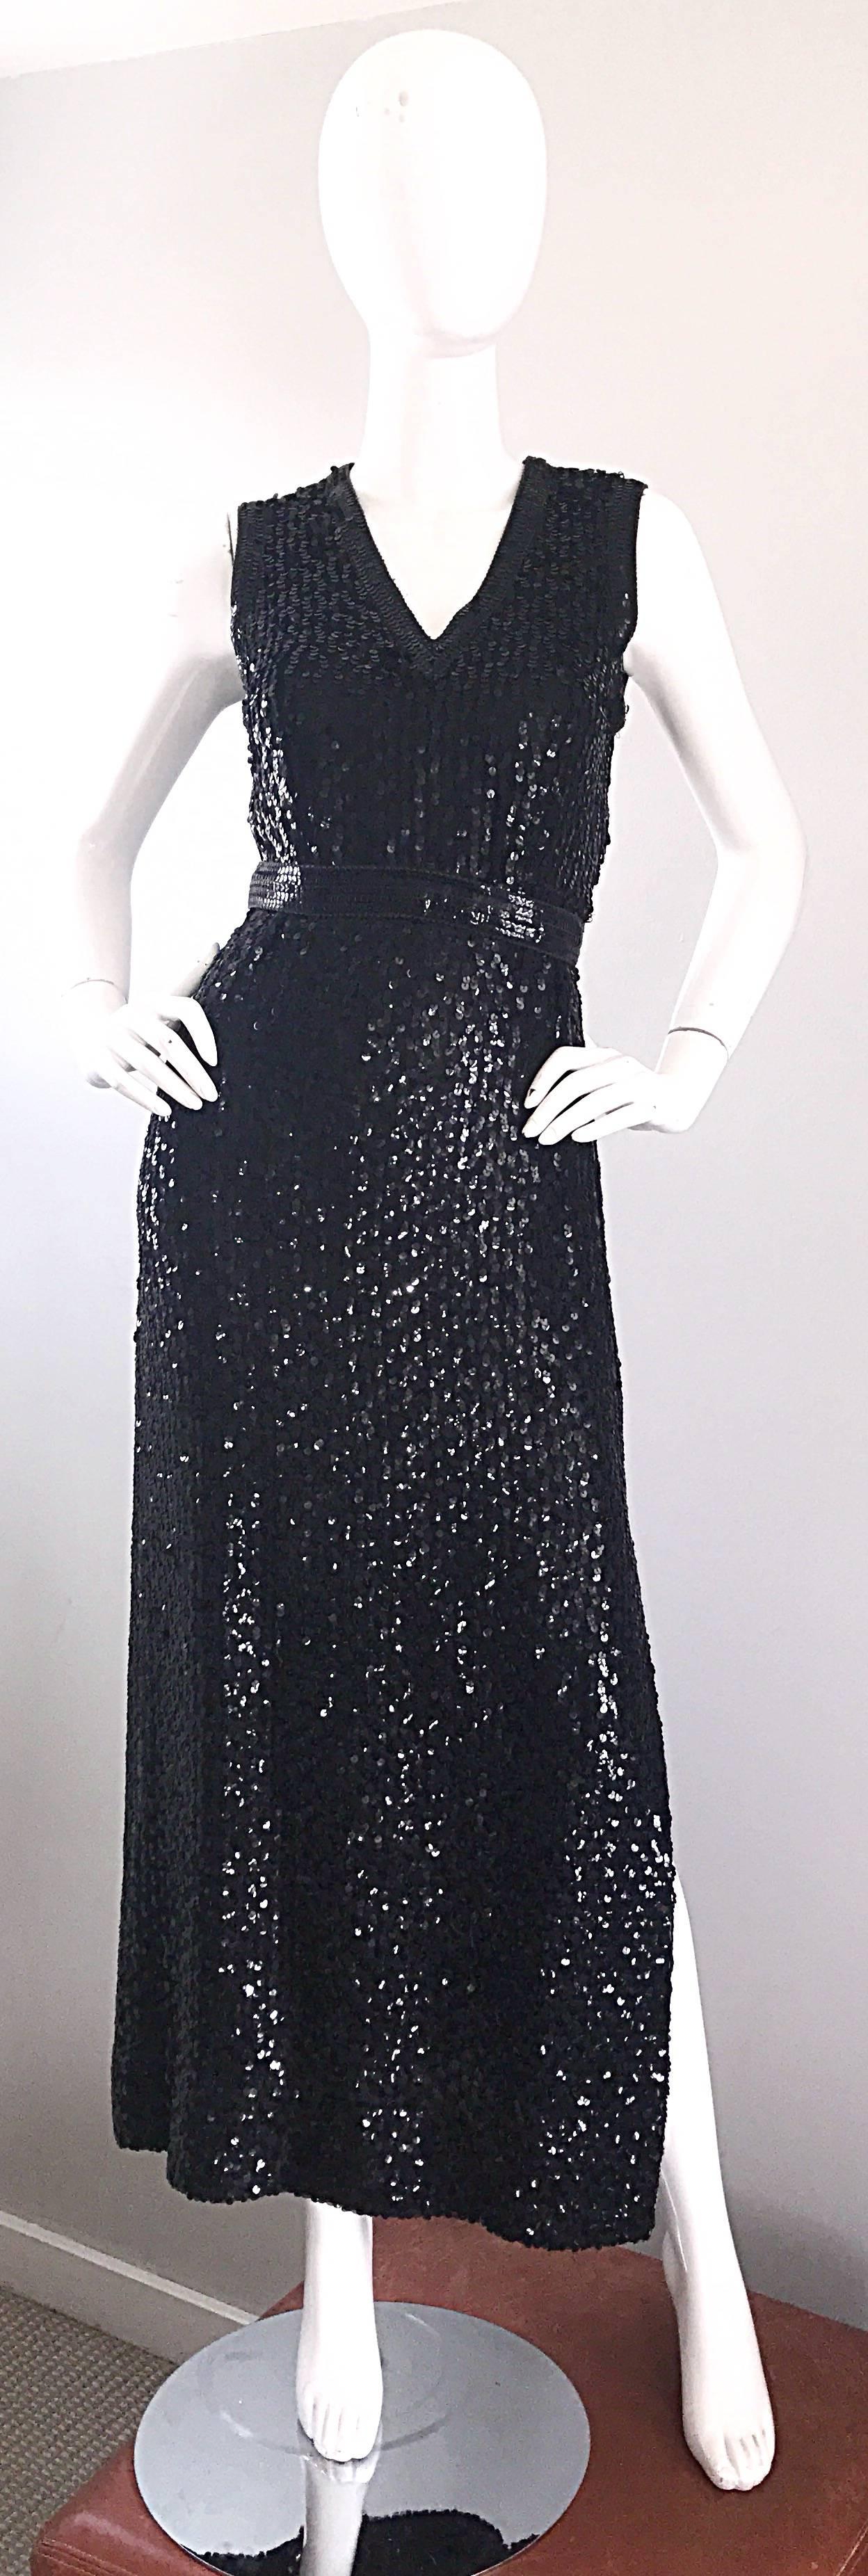 Gorgeous vintage 70s LILLIE RUBIN black silk fully sequined sleeveless gown! Features thousands of hand-sewn sequins throughout the entire dress. Attached belt hooks closed at the back center waist. Slit up the side left leg reveals just the right